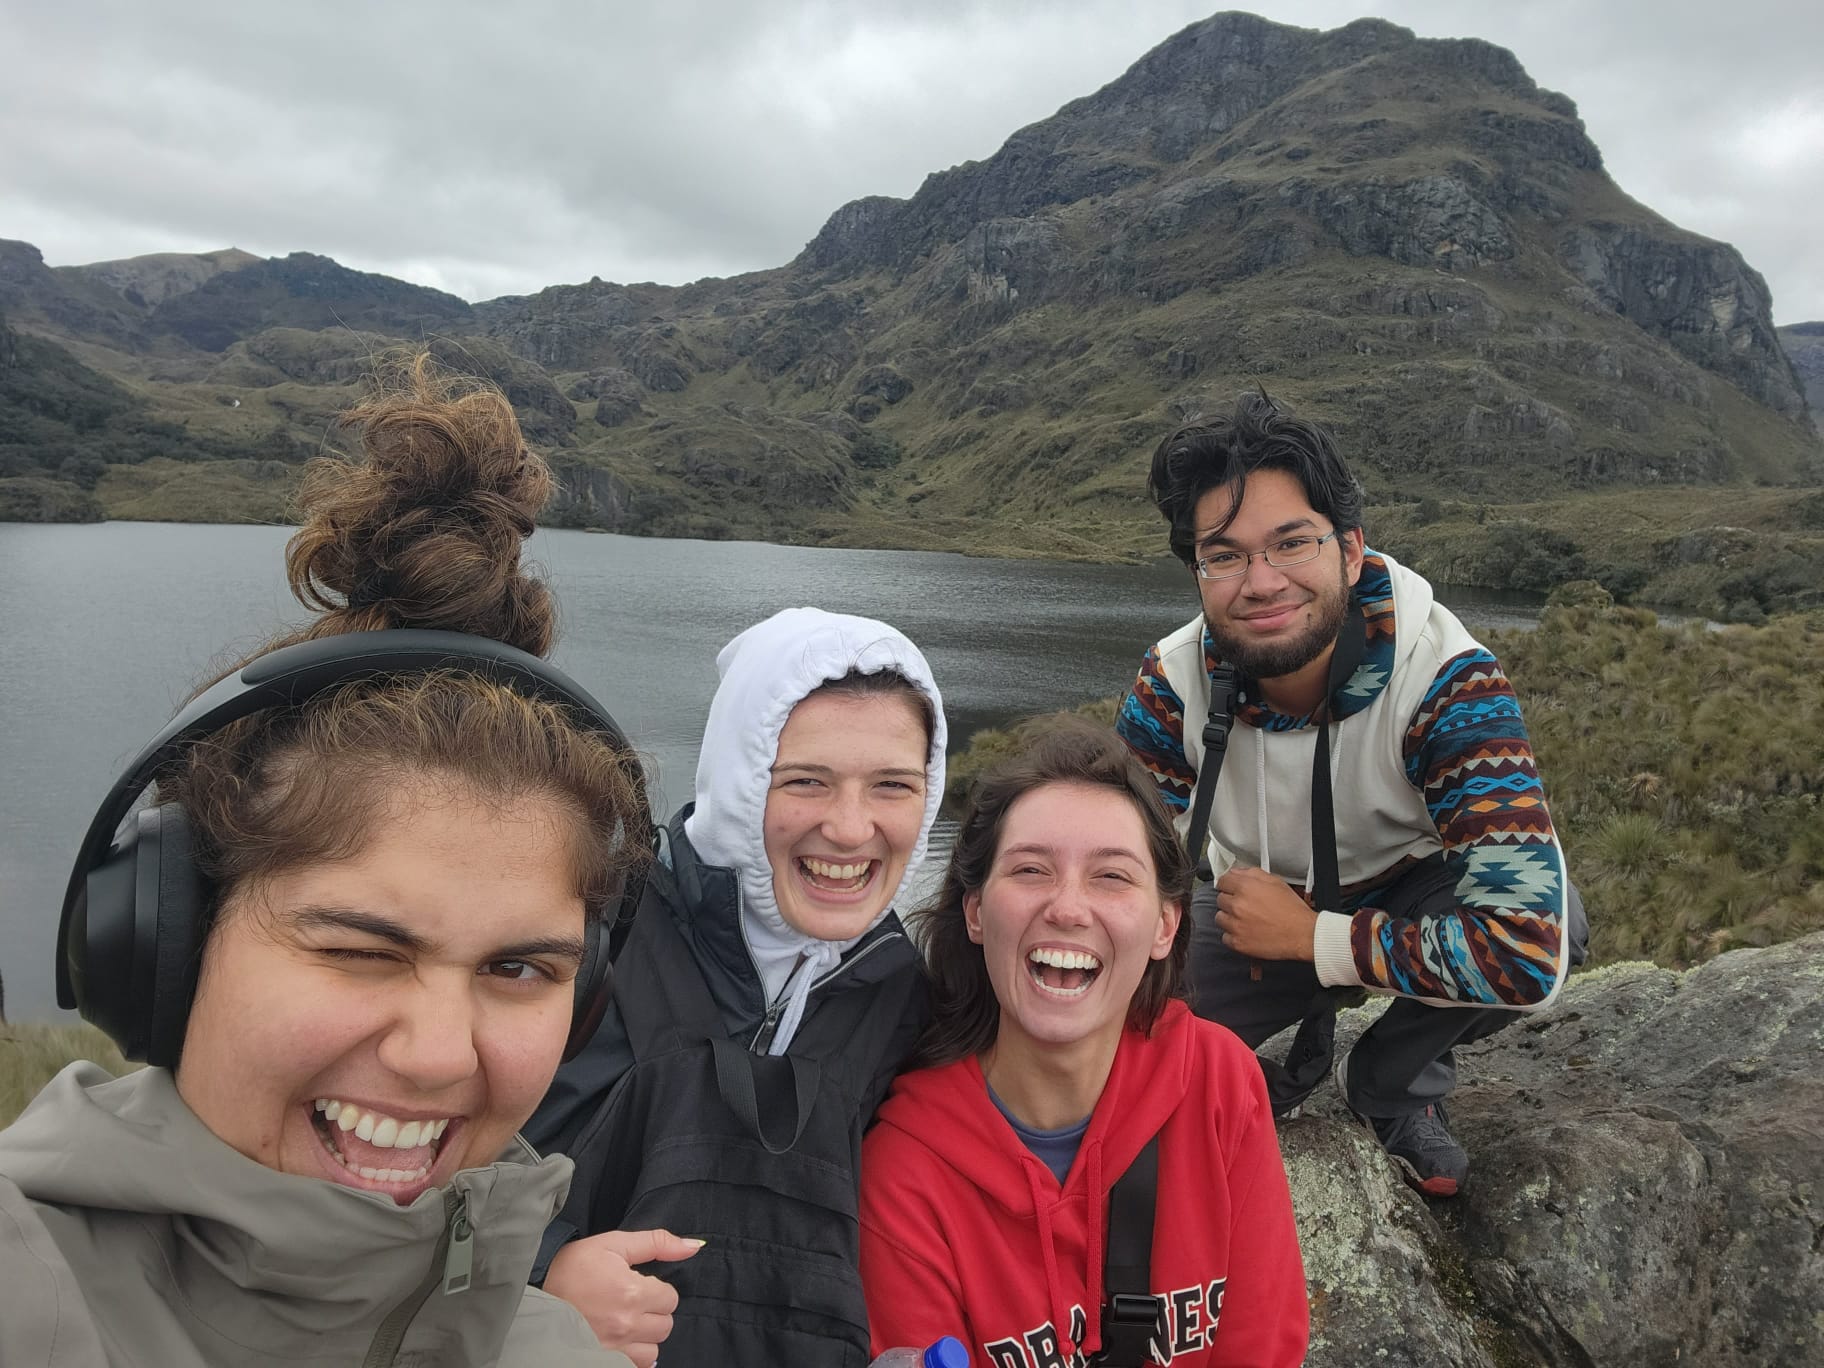 Pictured are my friends and I taking a selfie. Behind us in a lake in cajas, which is surrounded by mountainous rock and green shrubbery. 